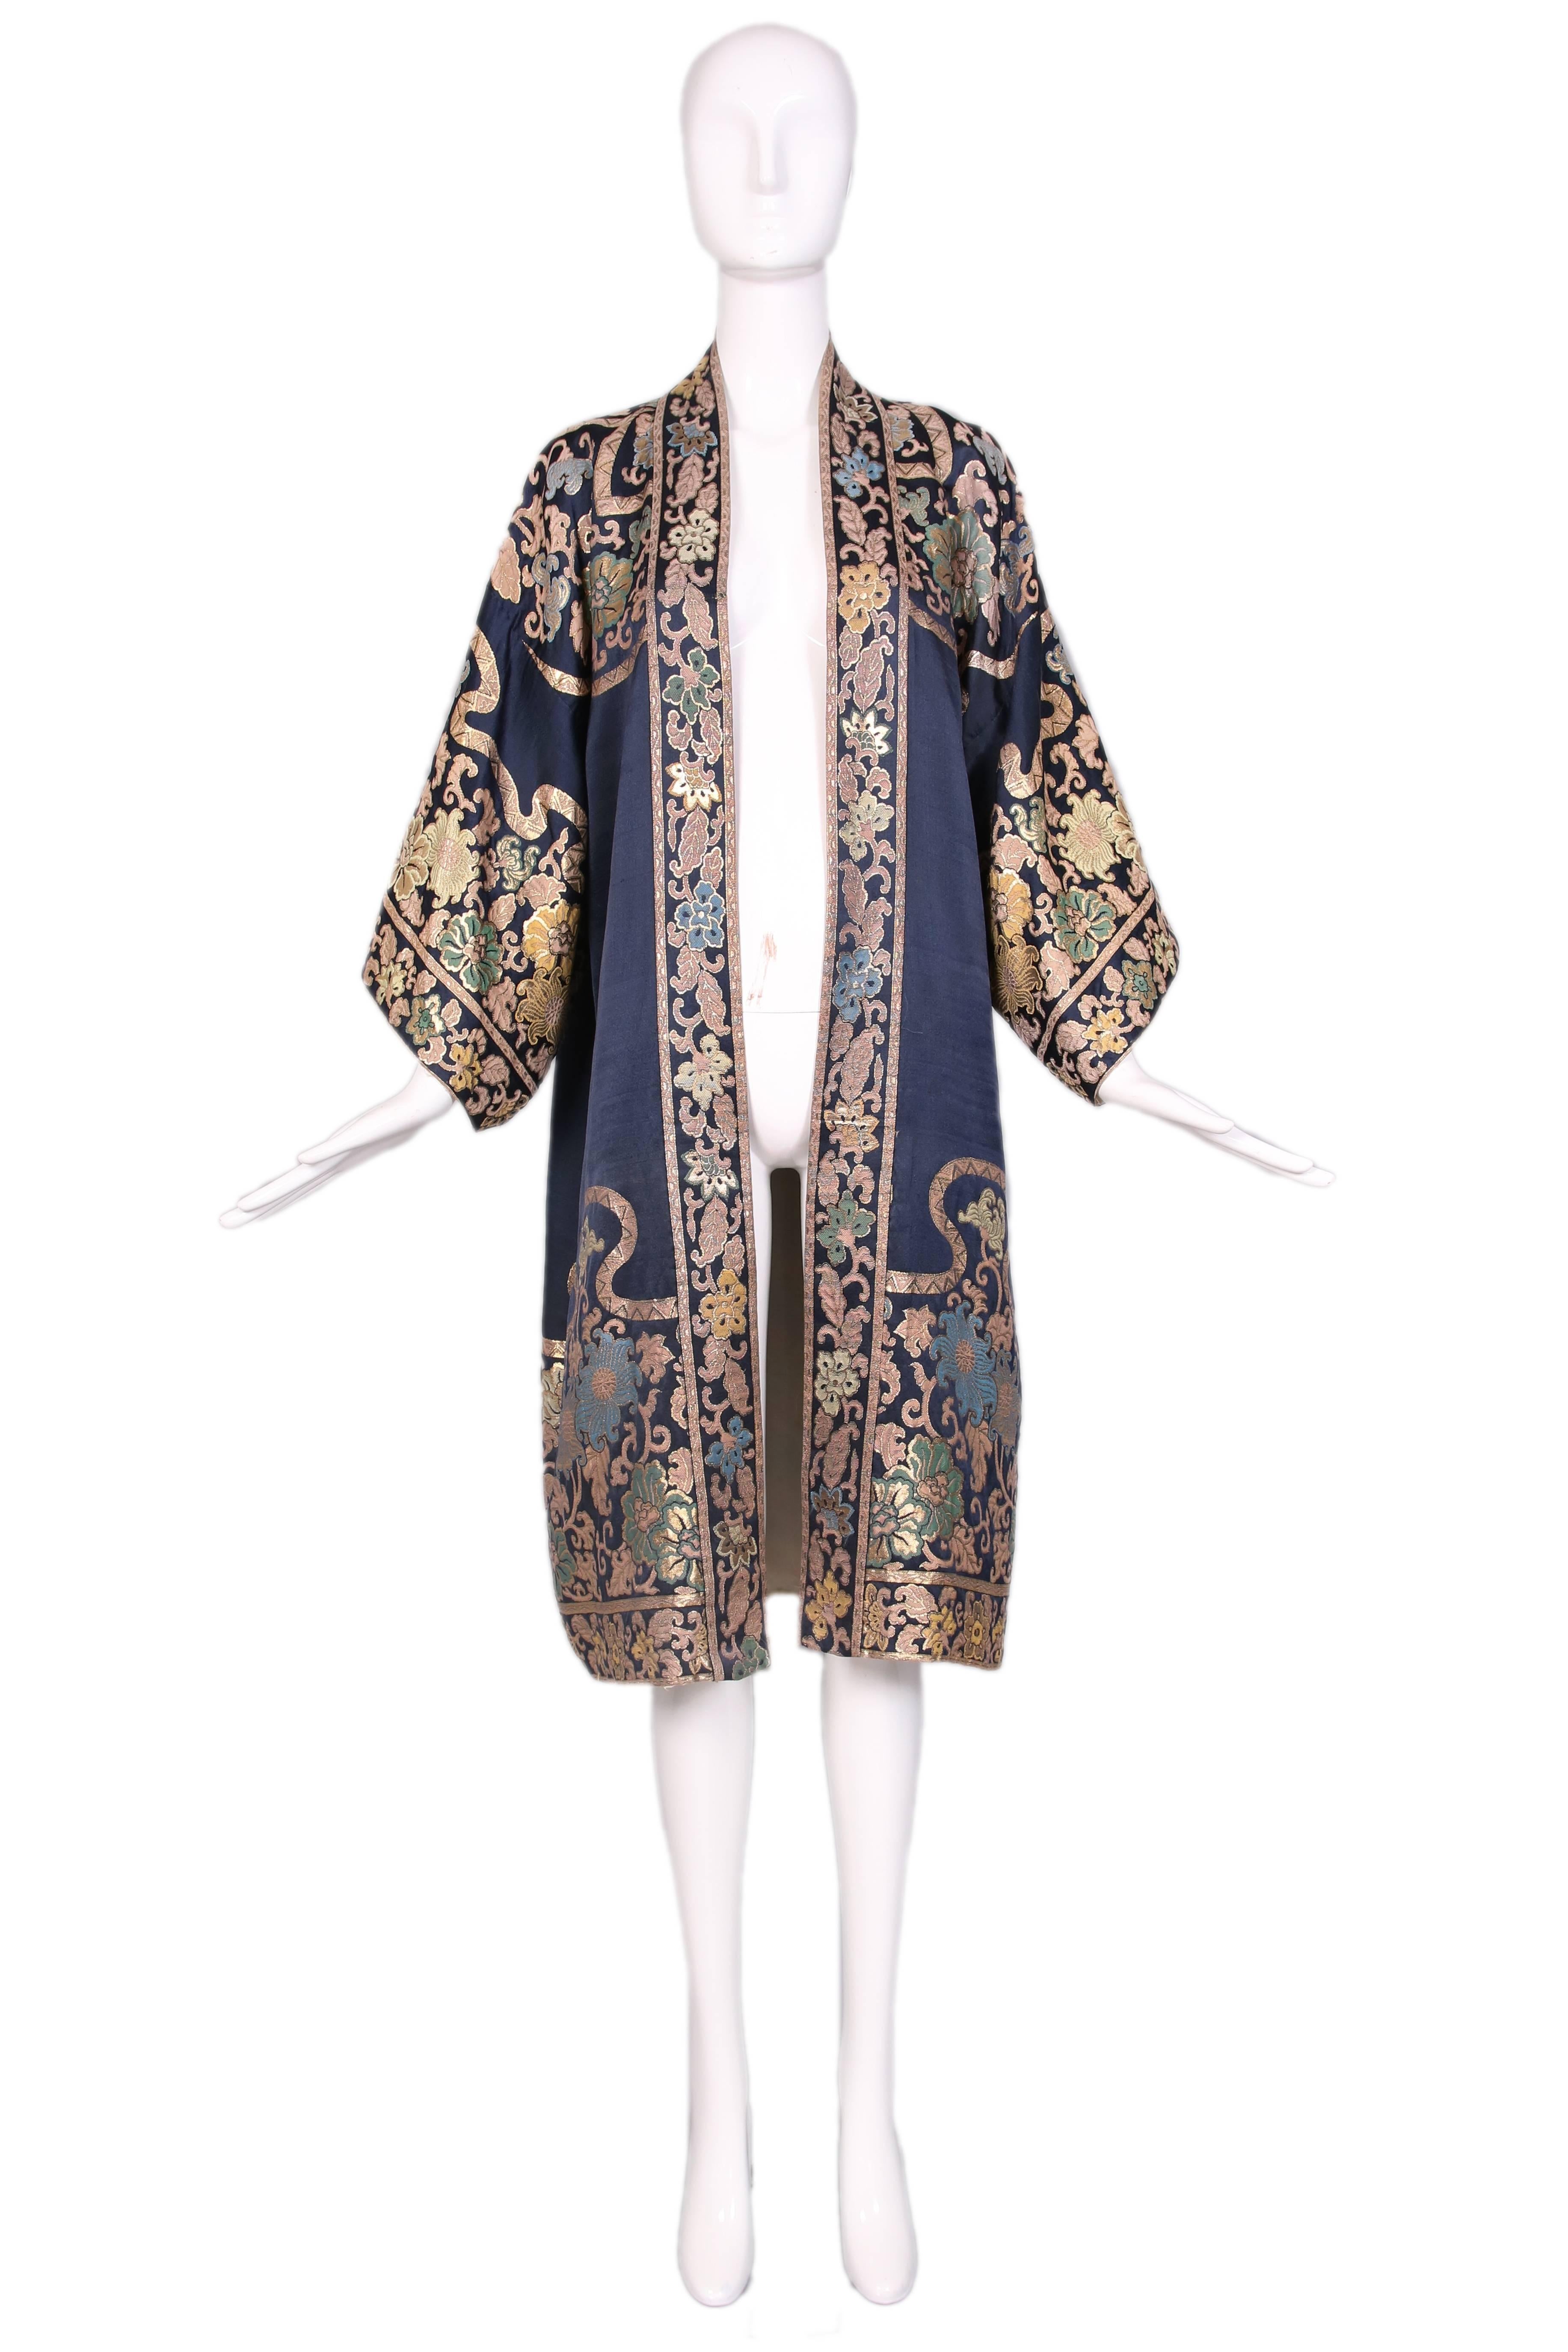 1920's blue silk open front coat duster with metallic floral motif and kimono sleeves. Fully lined in silk. In very good to excellent condition with some slight, scattered yellow stains at the interior lining and two nickel sized areas at the back